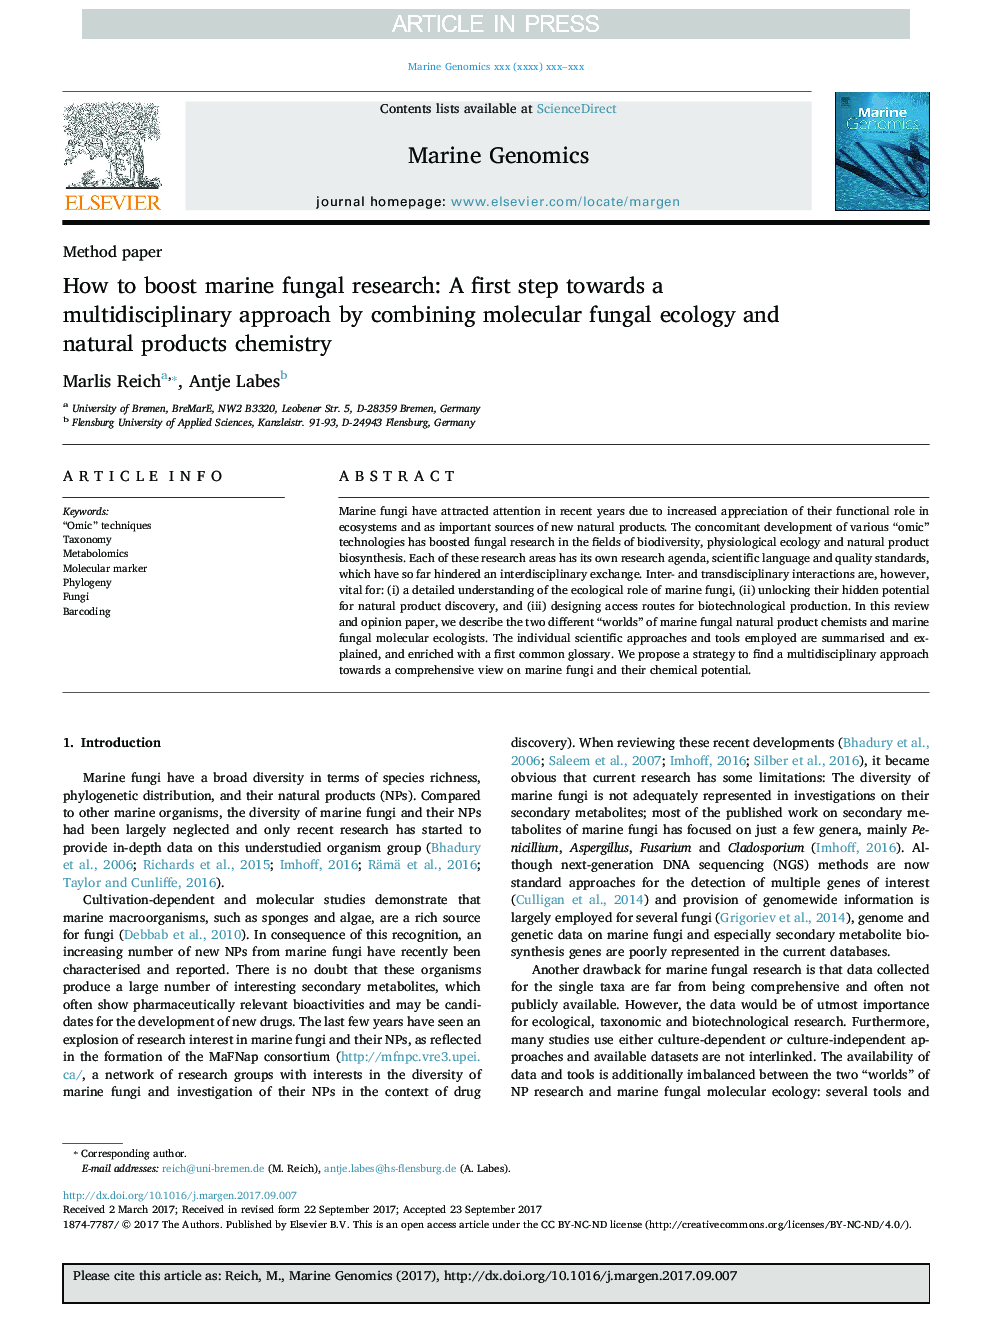 How to boost marine fungal research: A first step towards a multidisciplinary approach by combining molecular fungal ecology and natural products chemistry